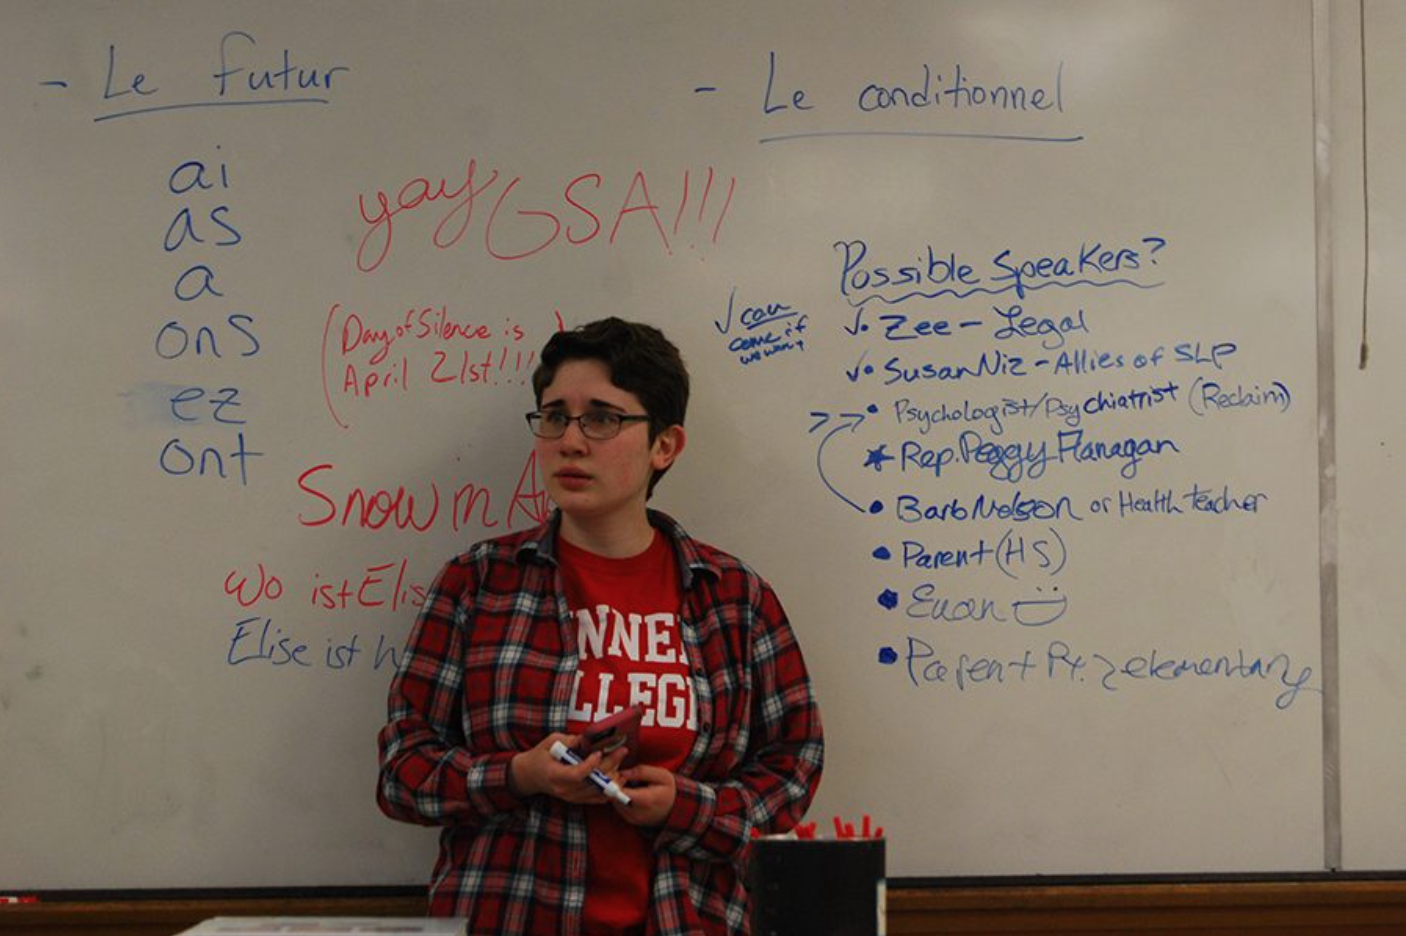 Senior Elise Bargman discusses possible speakers for a School Board open forum during a Gender Sexuality Alliance meeting. 